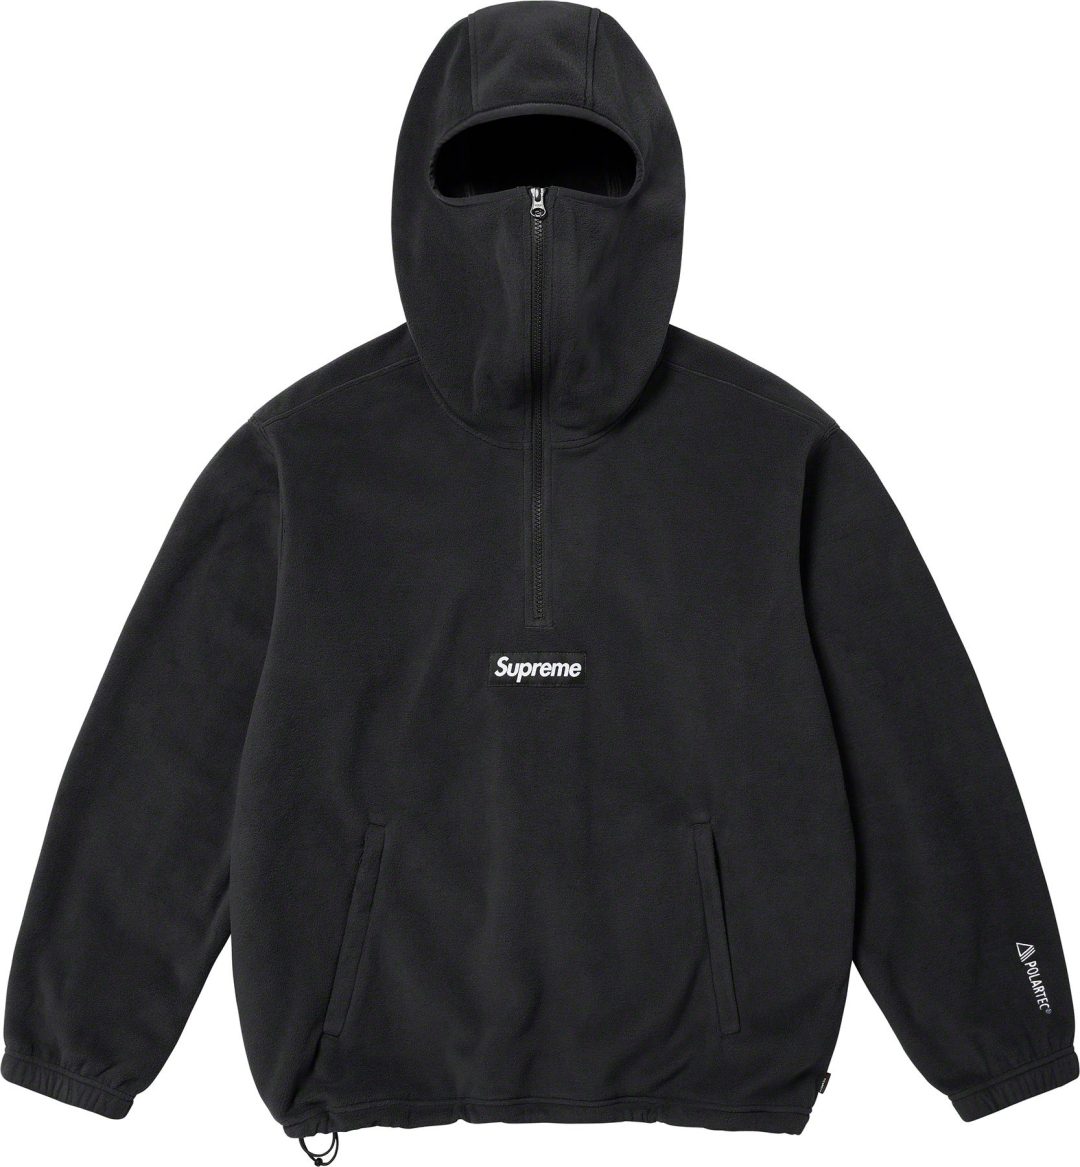 Supreme 公式通販サイトで11月18日 Week13に発売予定の23FW 23AW 新作